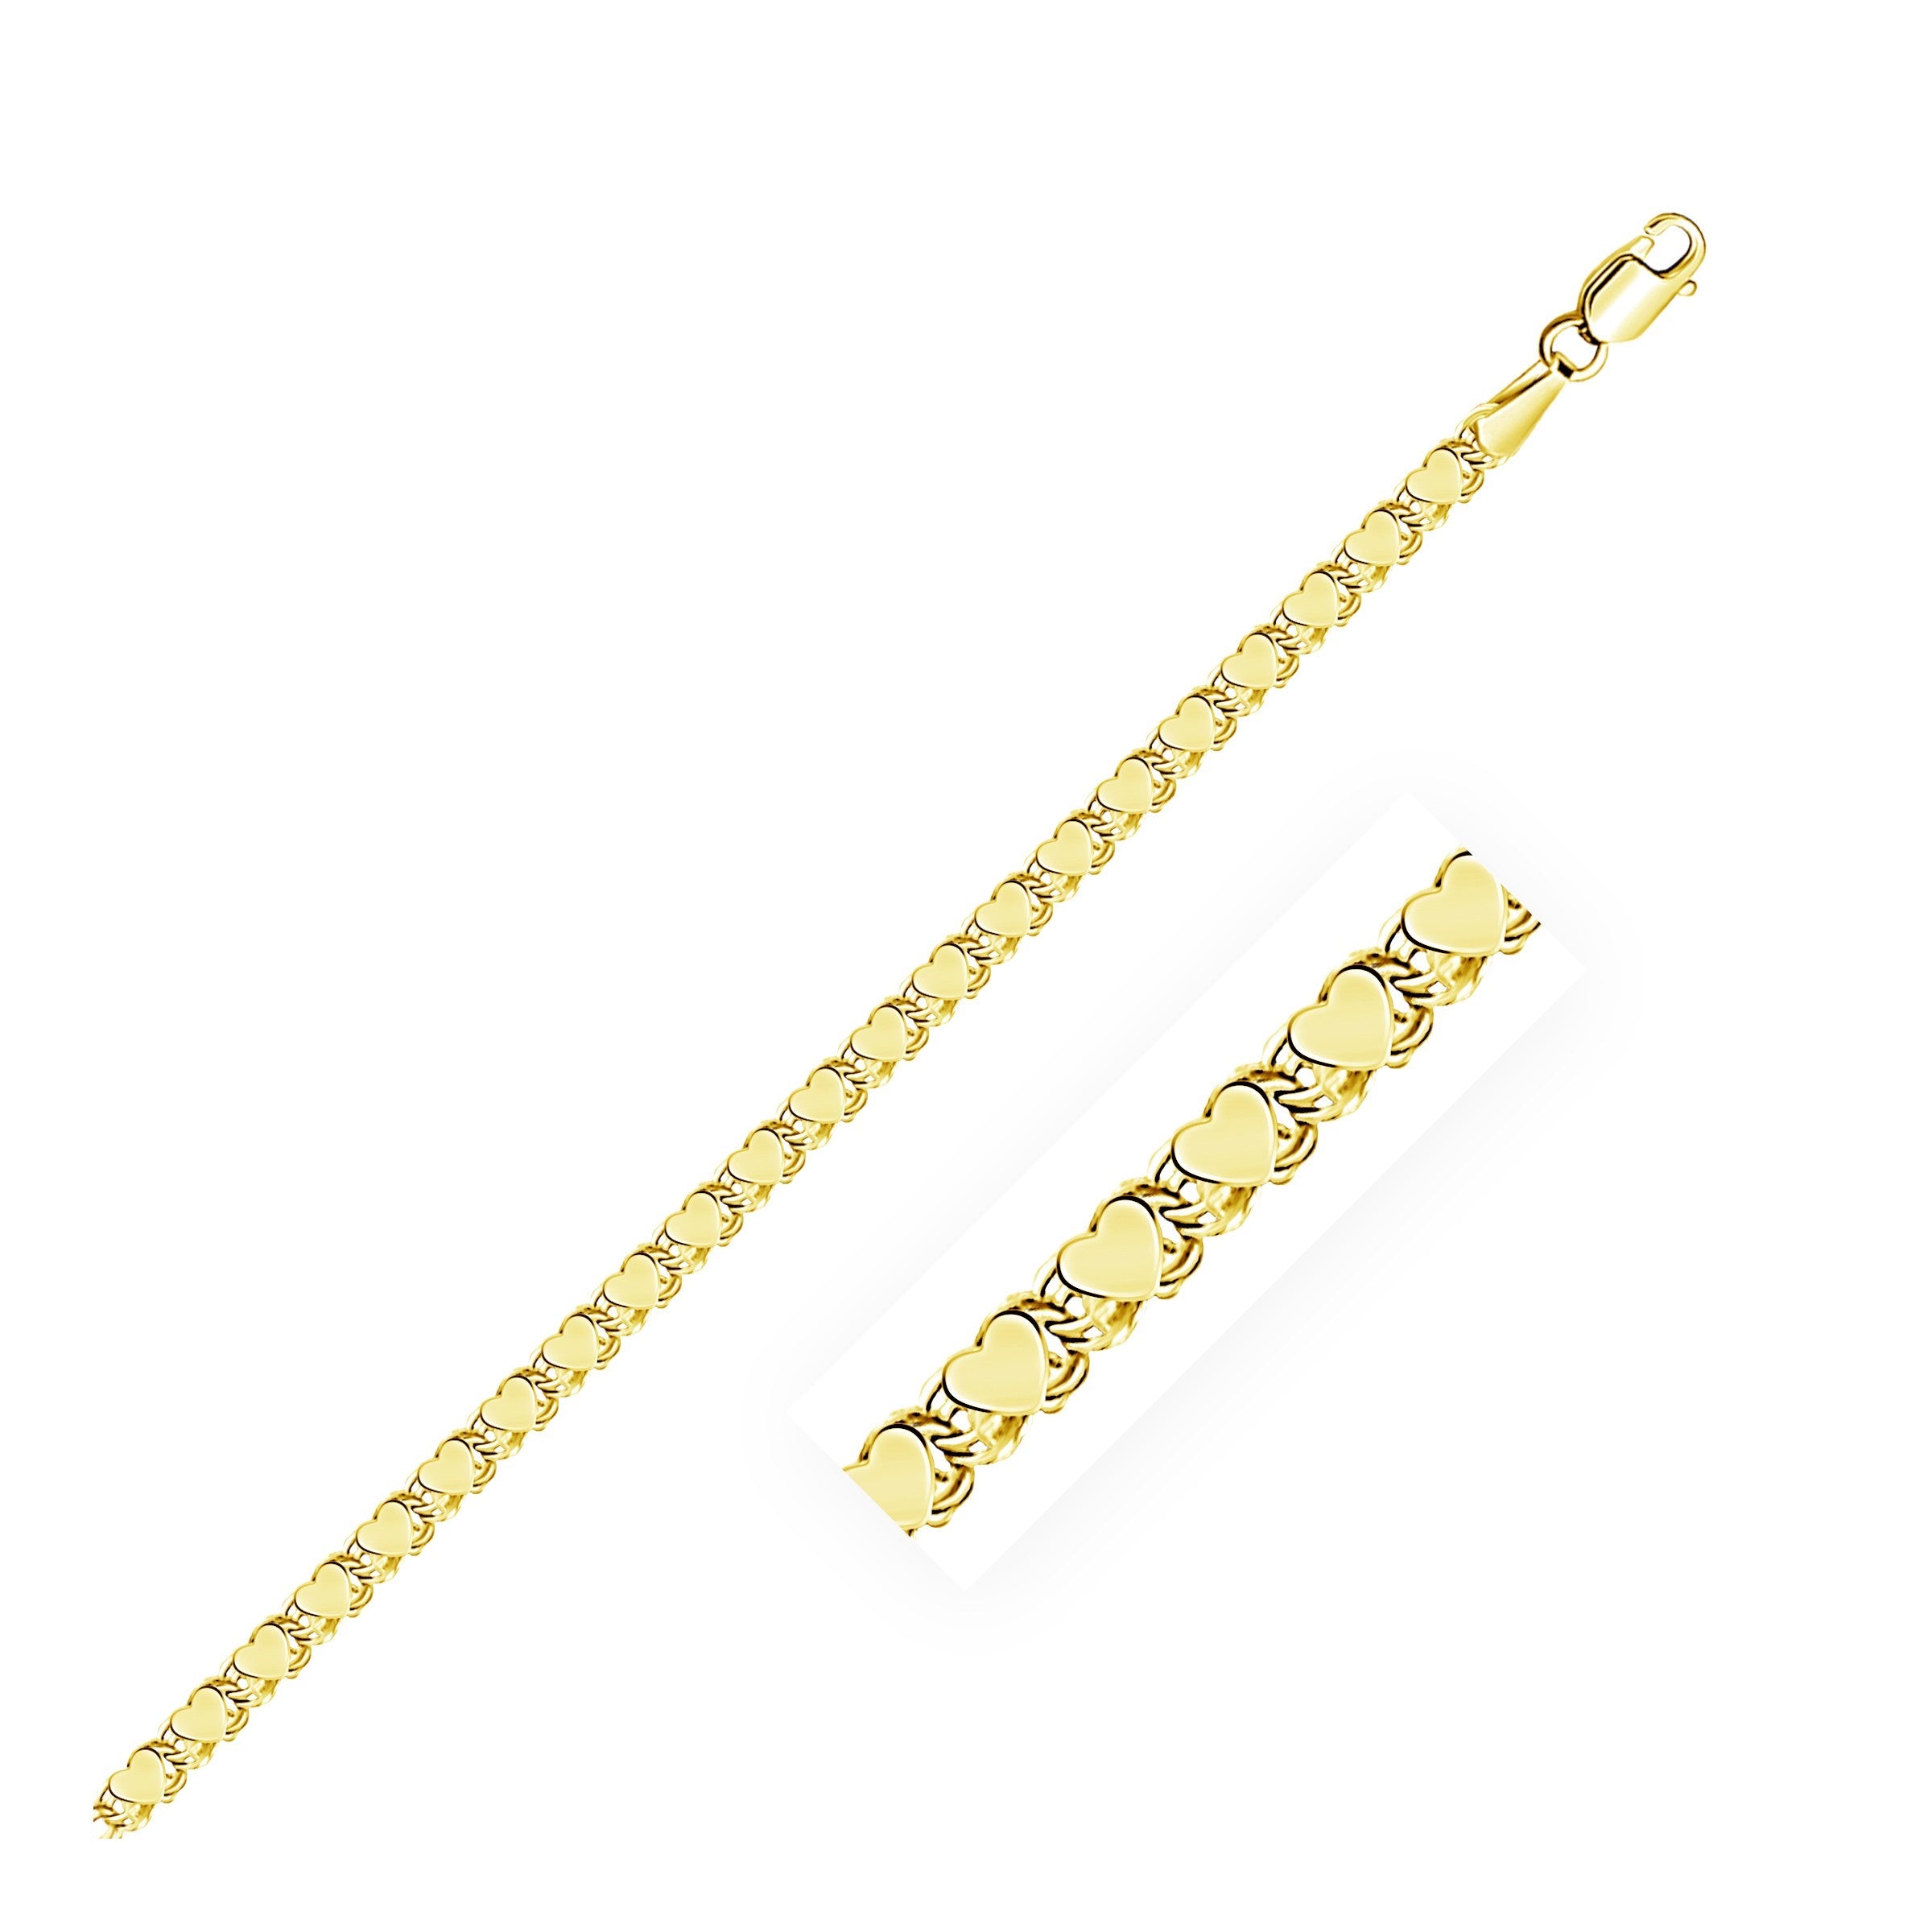 2.9mm 14k Yellow Gold Heart Anklet